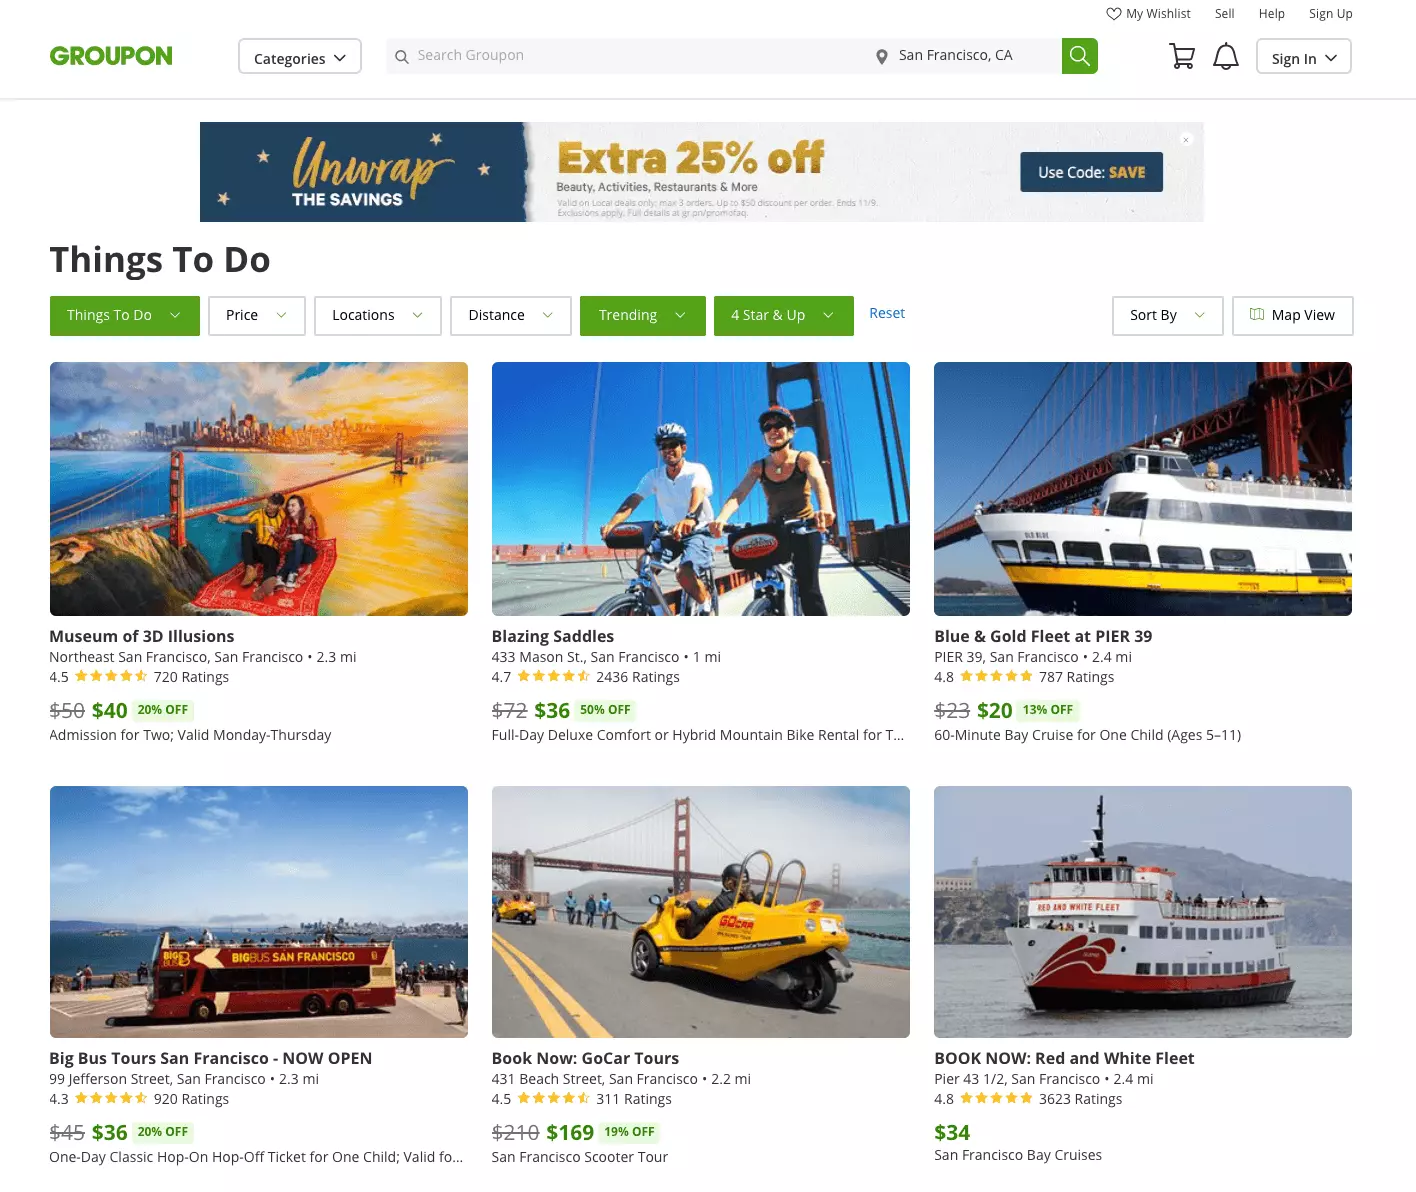 Groupon things to do page
